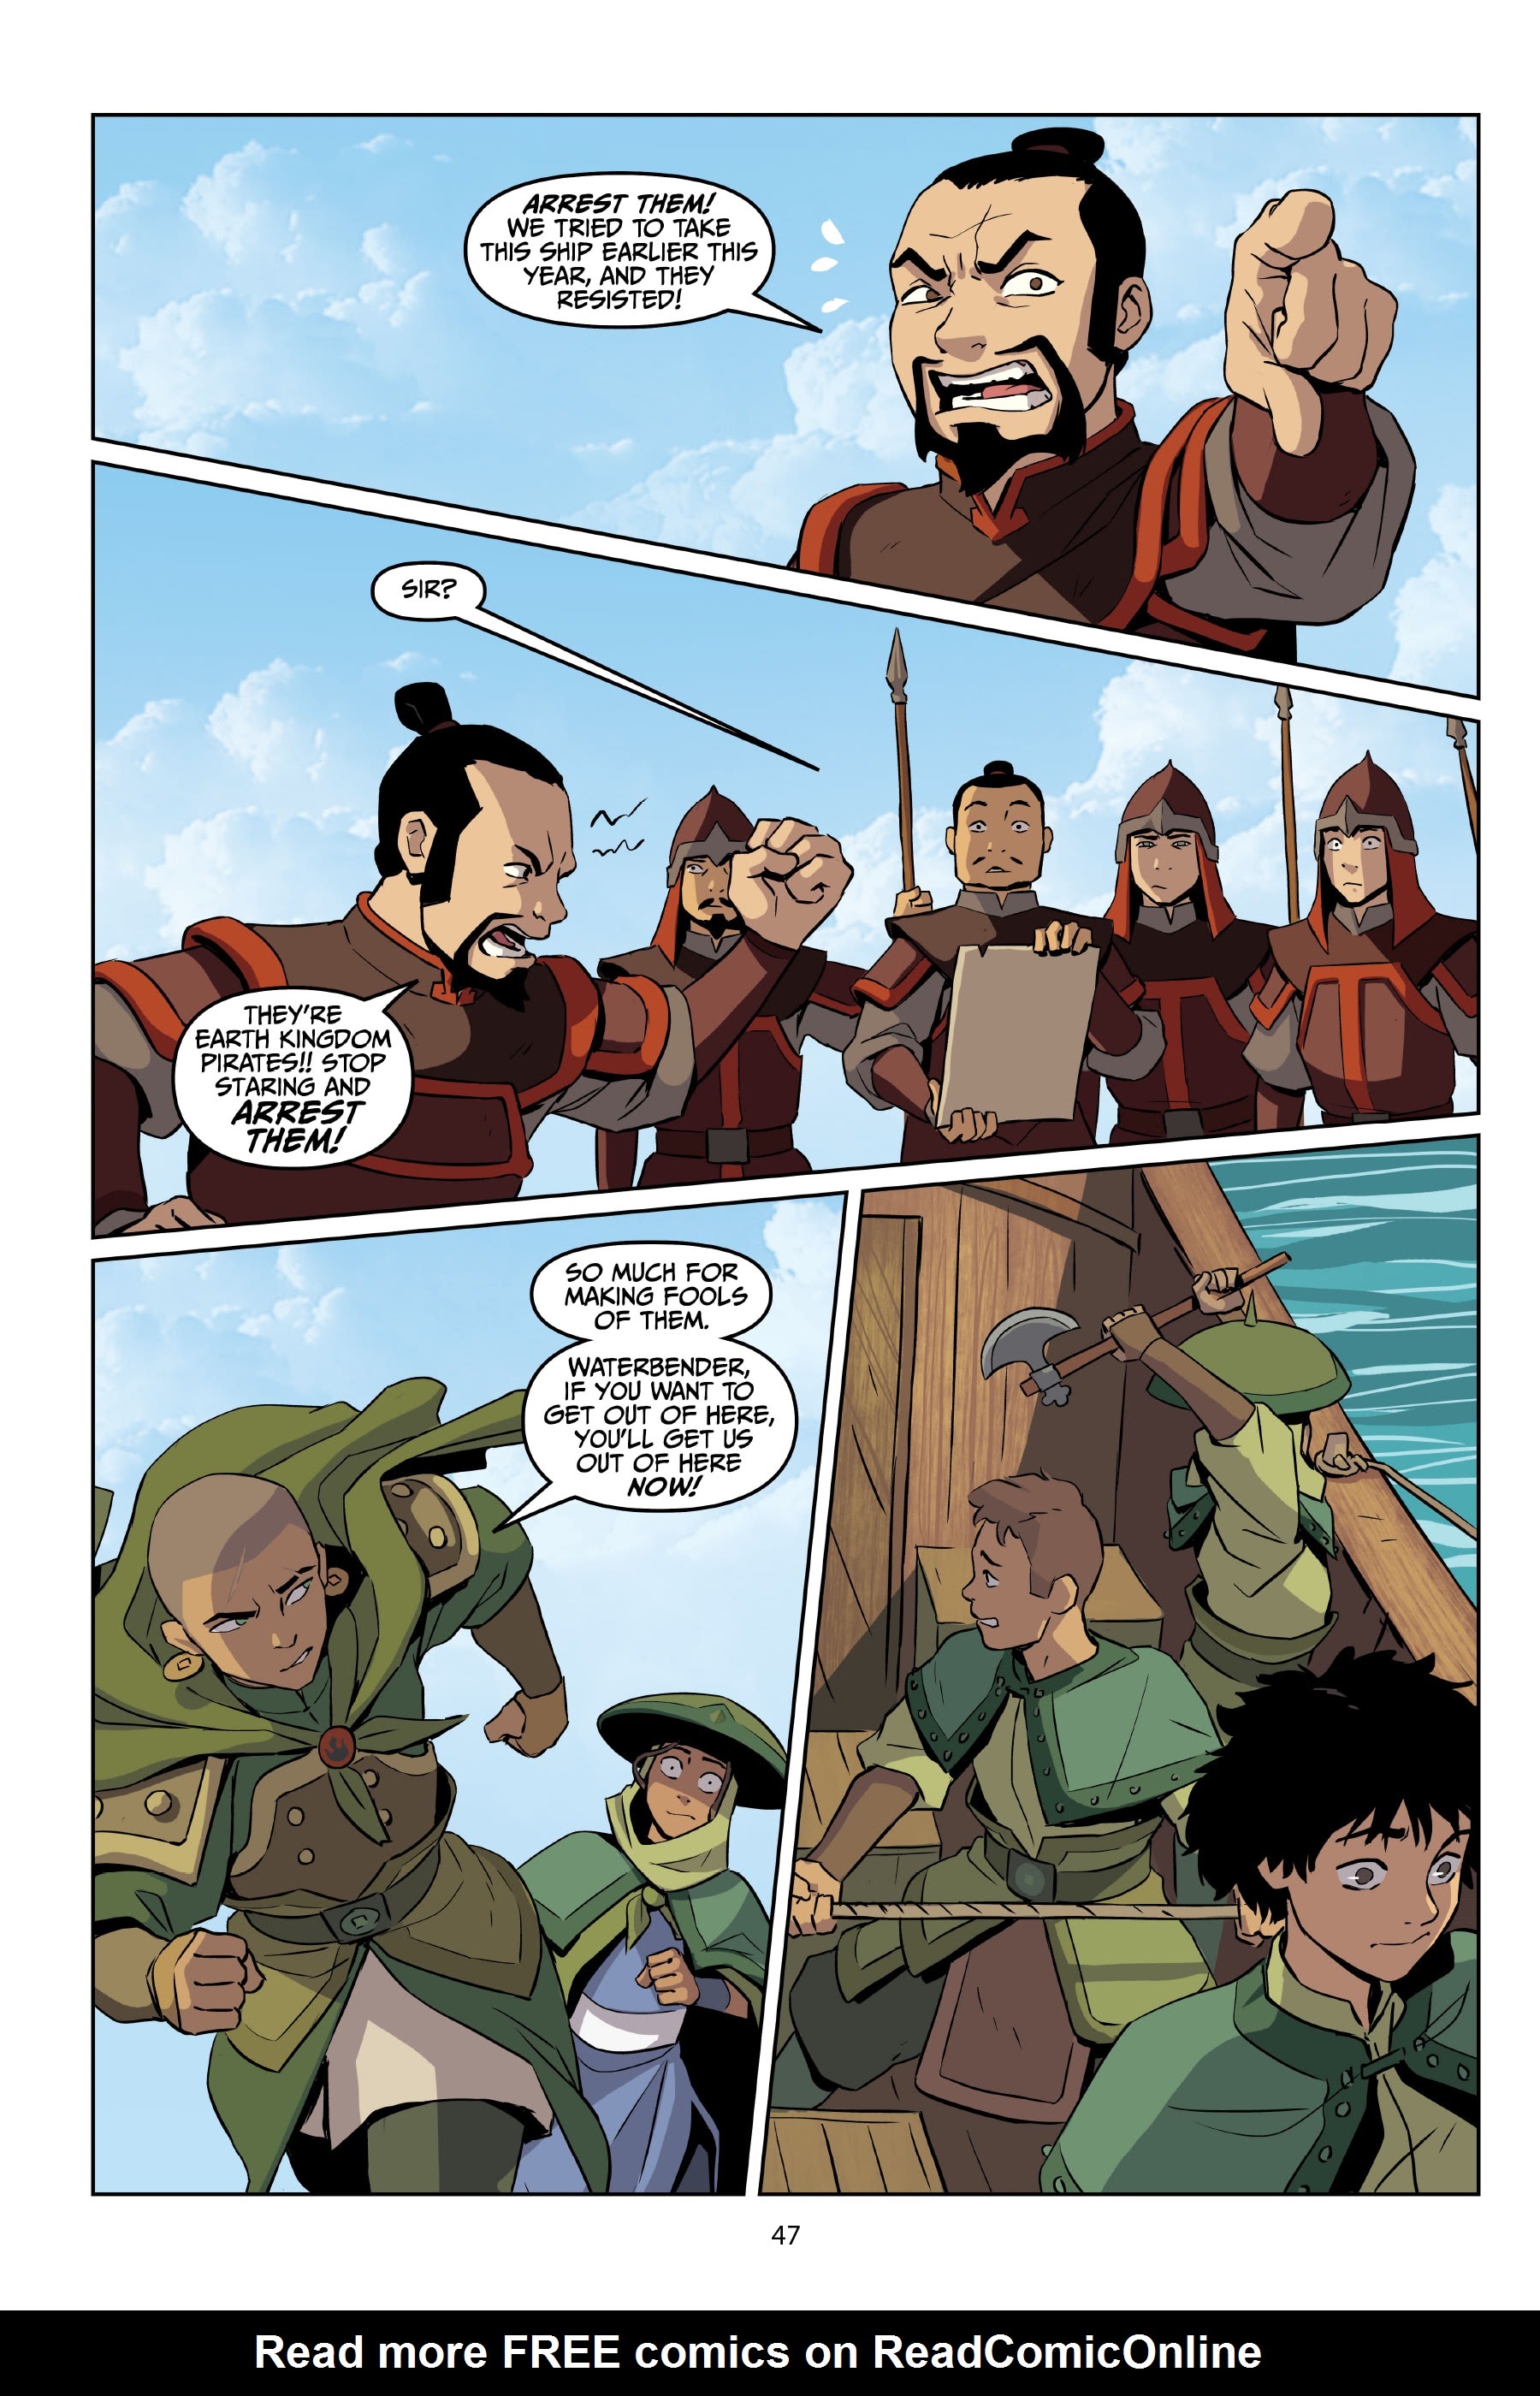 Read online Avatar: The Last Airbender—Katara and the Pirate's Silver comic -  Issue # TPB - 48